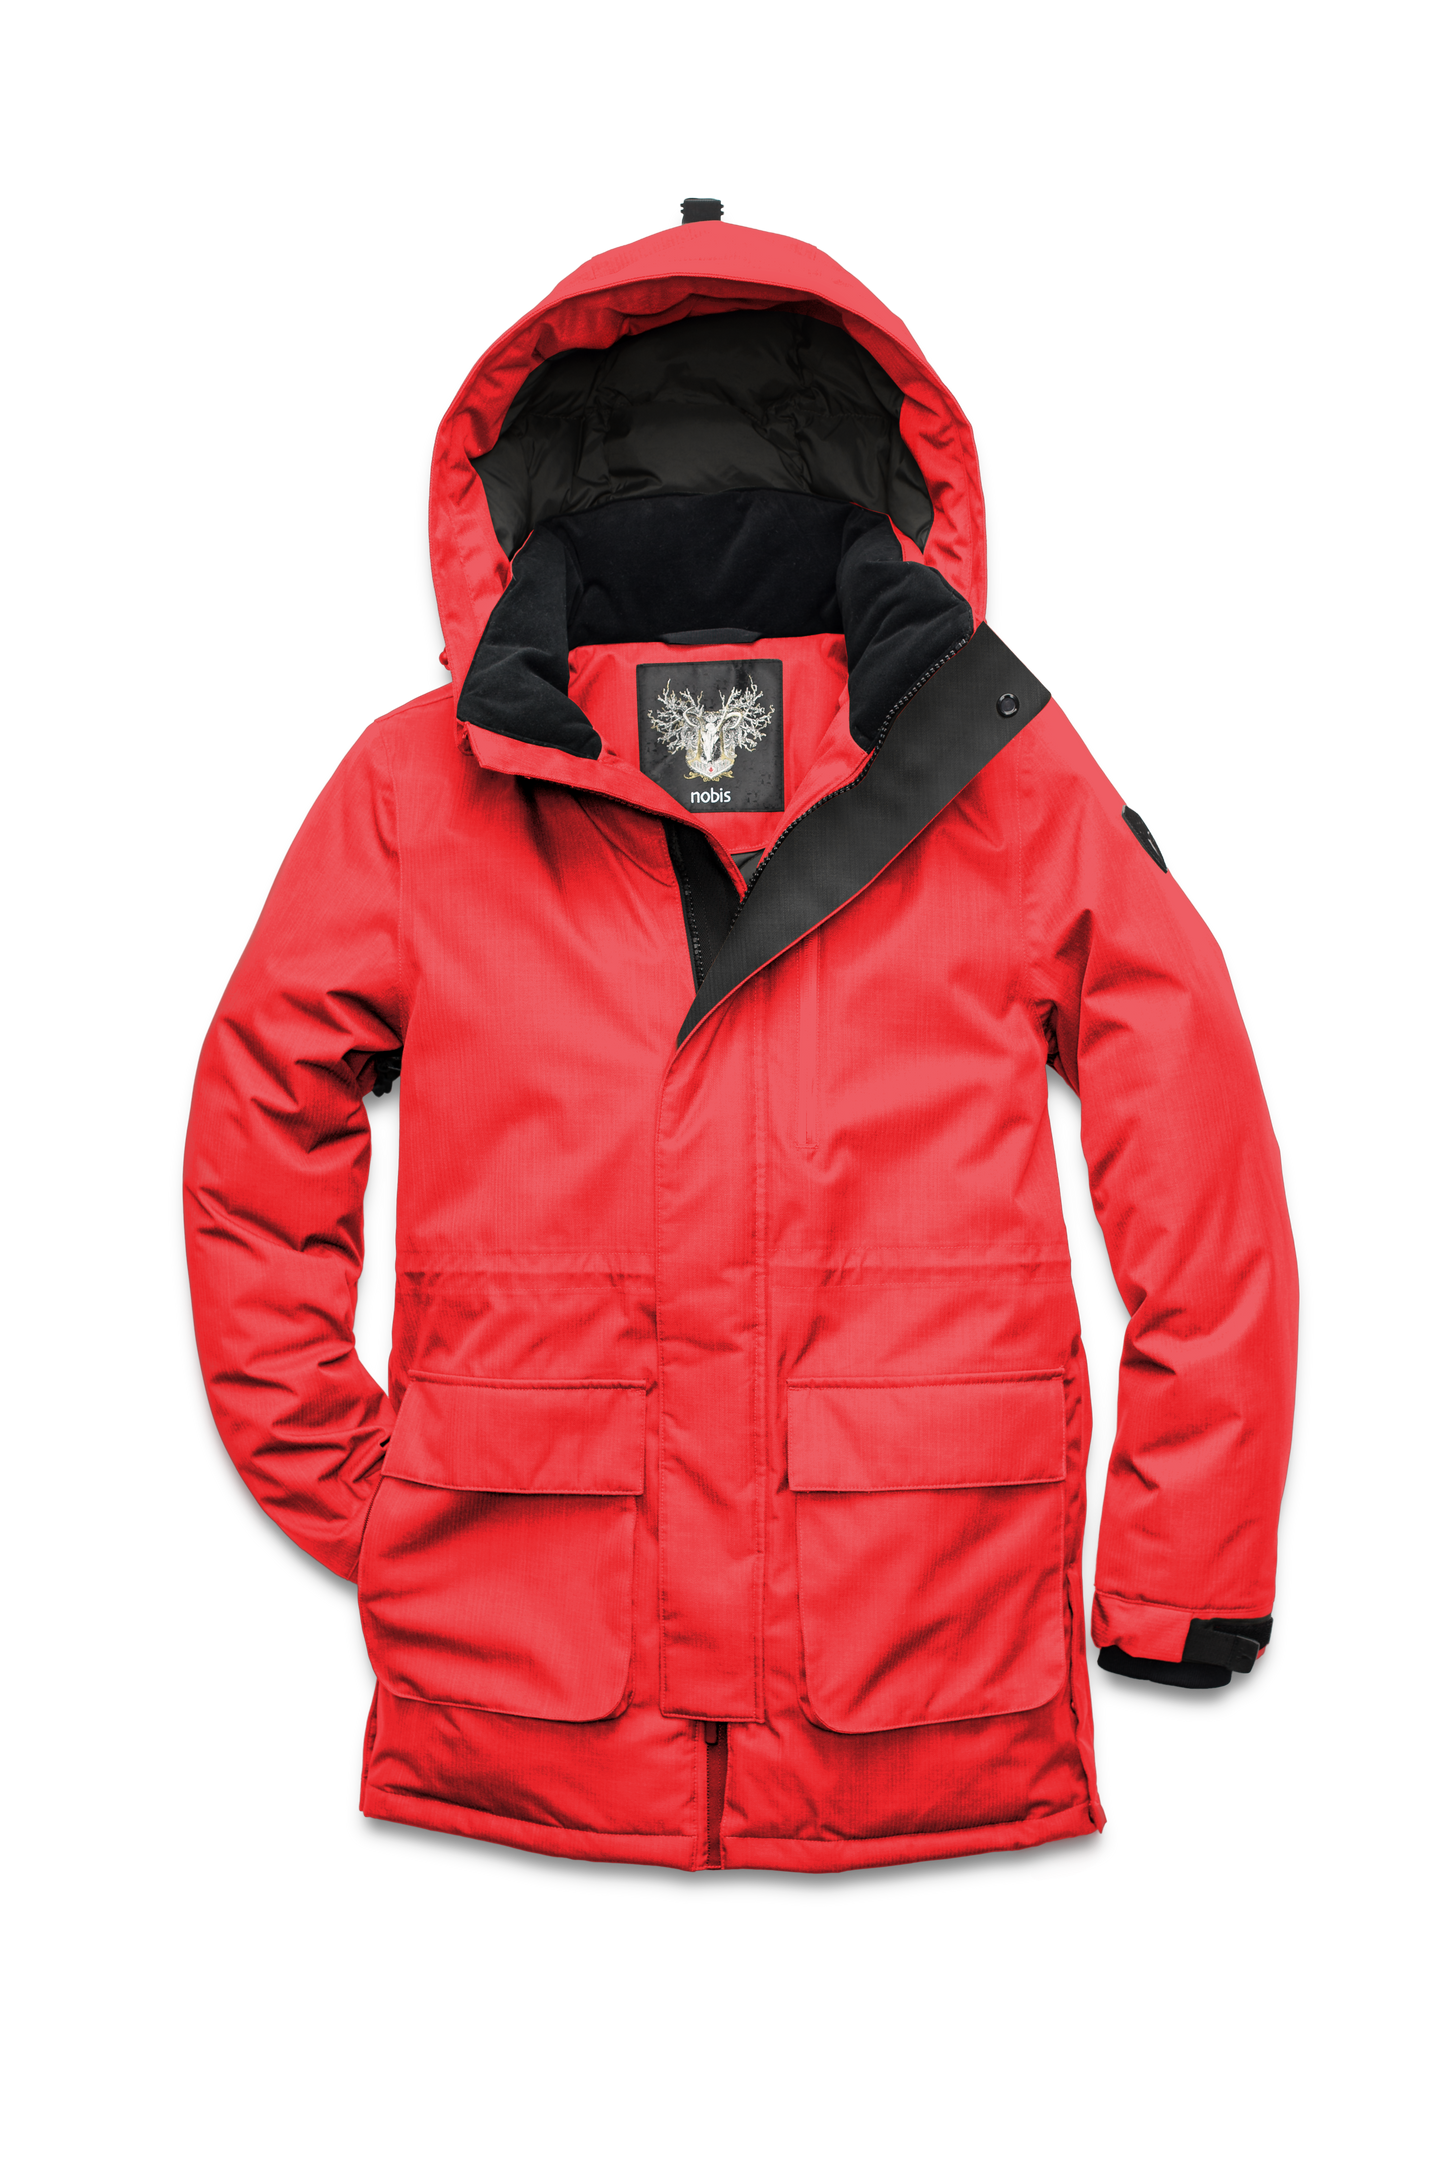 Mid weight men's down filled parka with two patch pockets at the hip and snap closure side vents in Vermillion